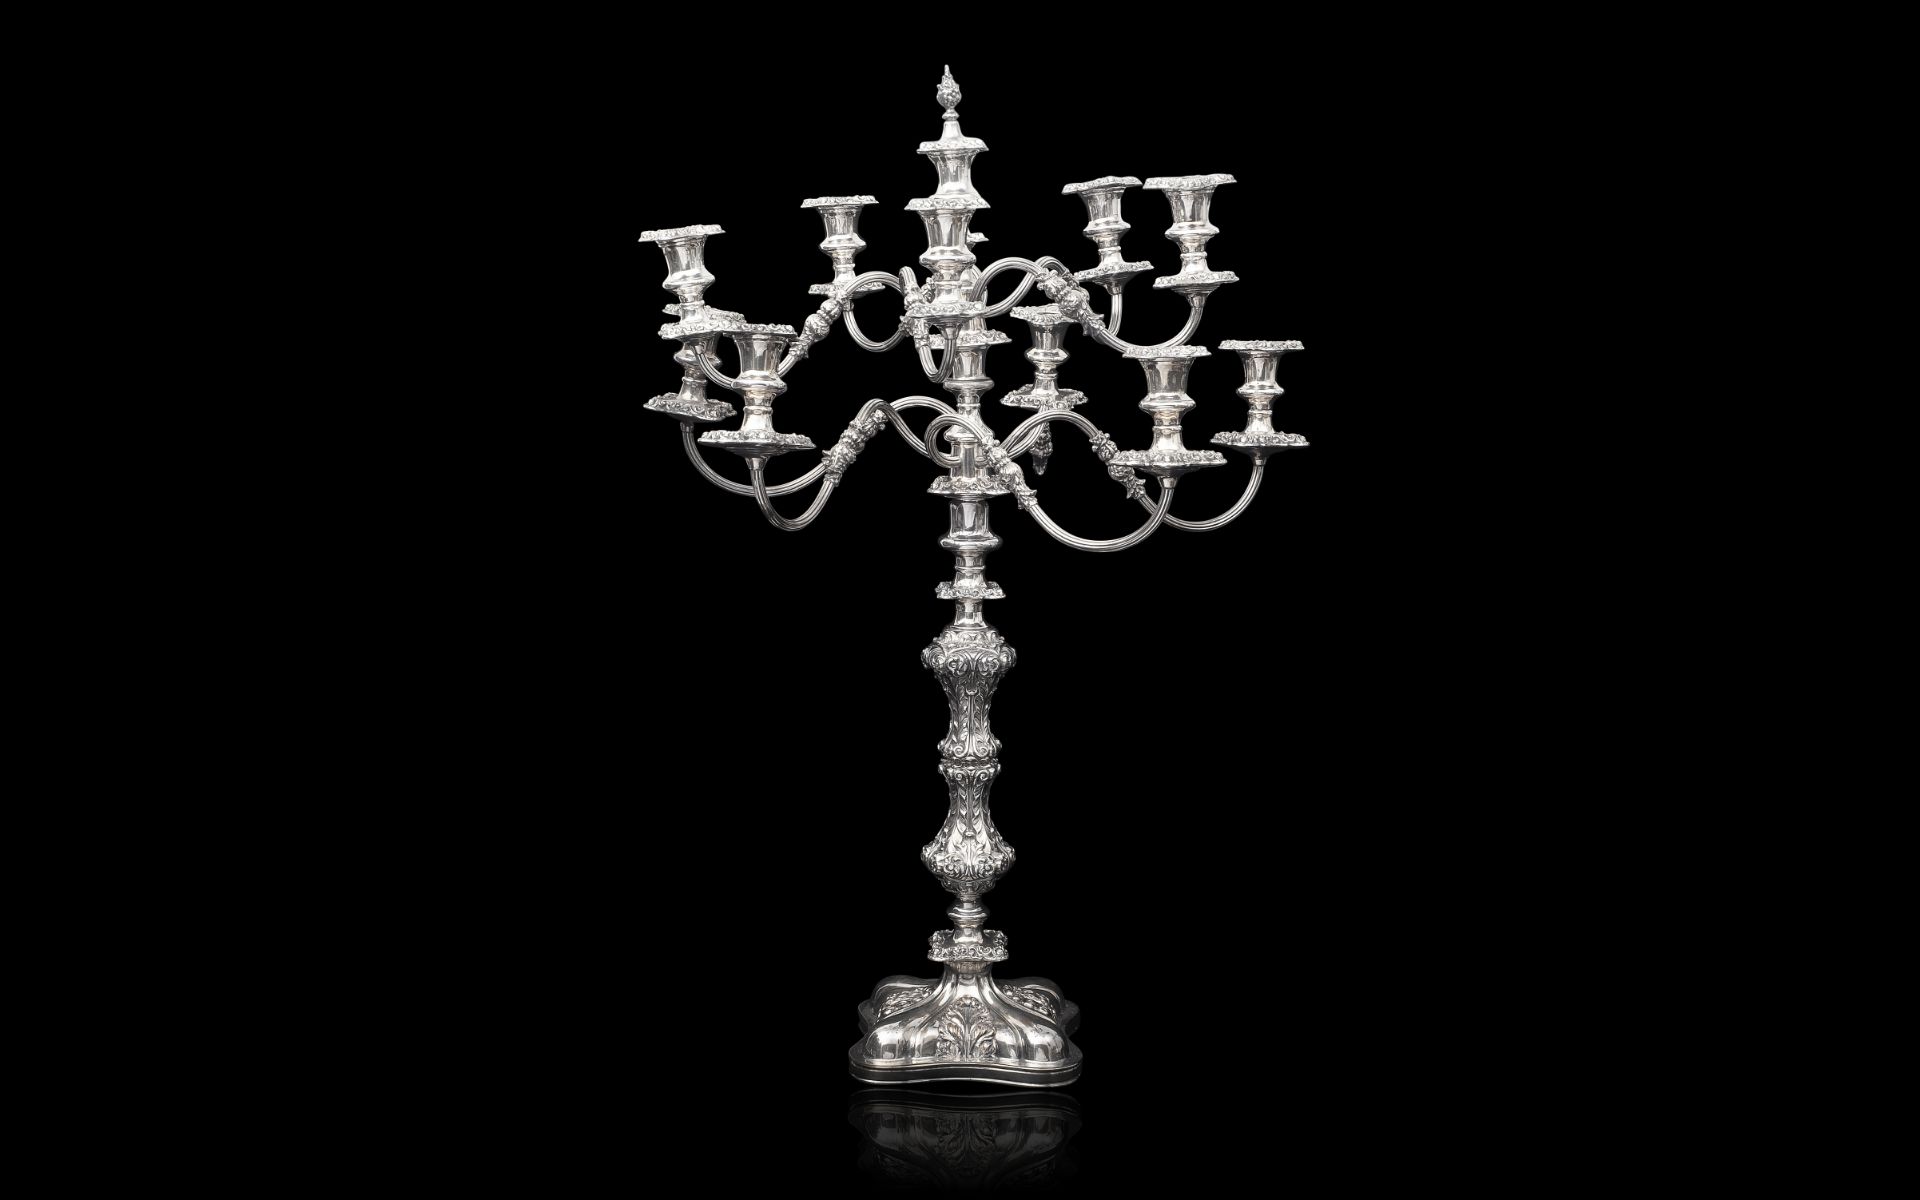 AN UNUSUALLY LARGE EARLY 20TH CENTURY SILVER PLATED CANDELABRA